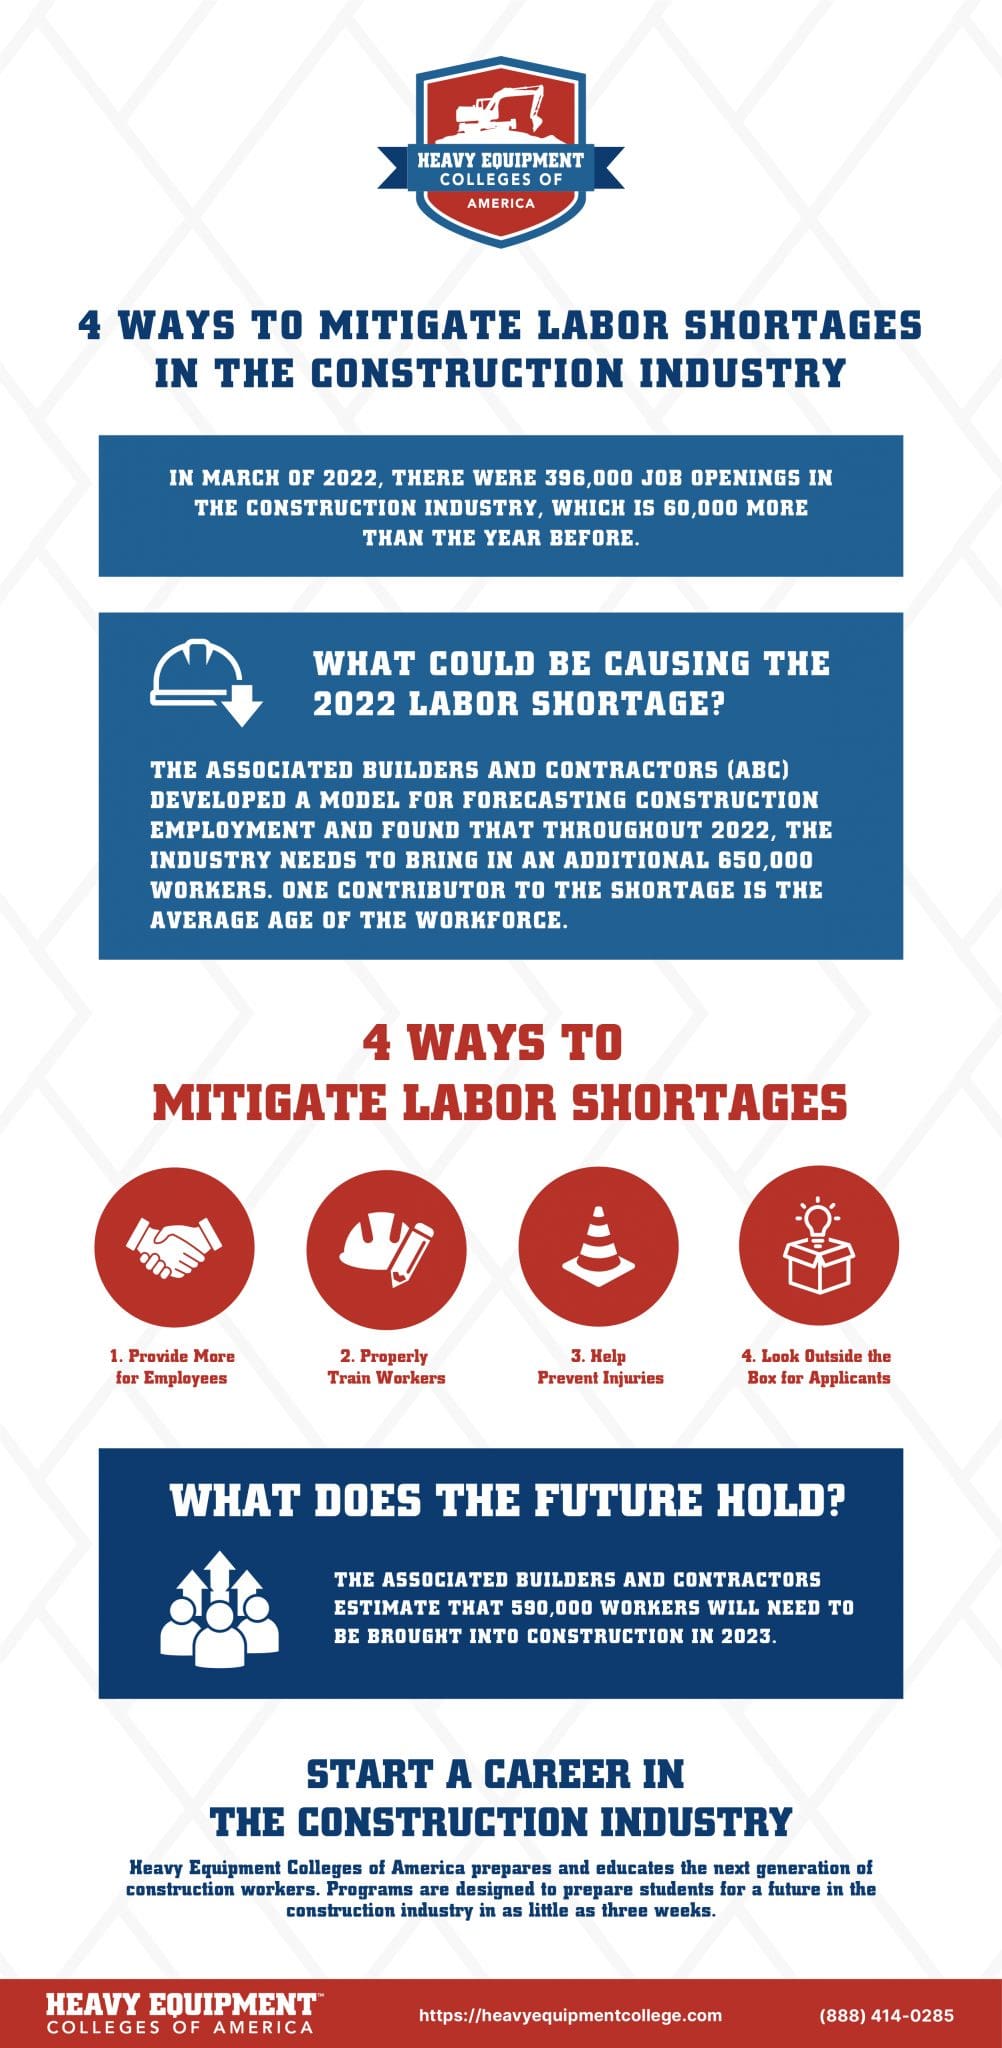 4 Ways to Mitigate Labor Shortages in the Construction Industry